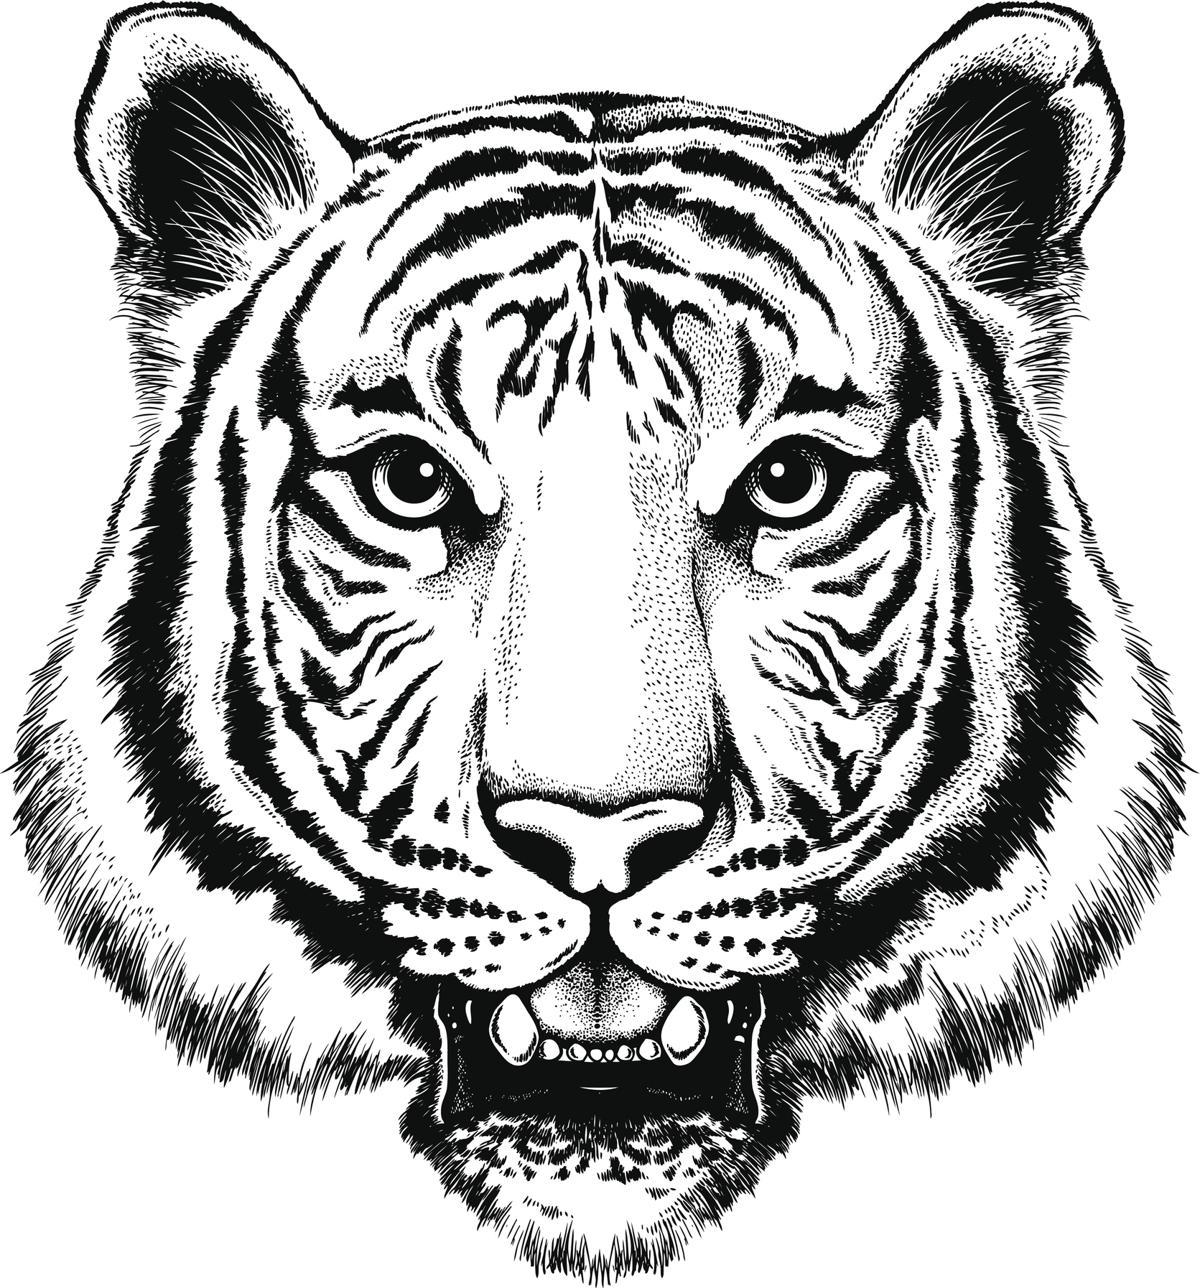 Black and White Tiger Logo - Utterly Mind-boggling Facts About the White Bengal Tiger